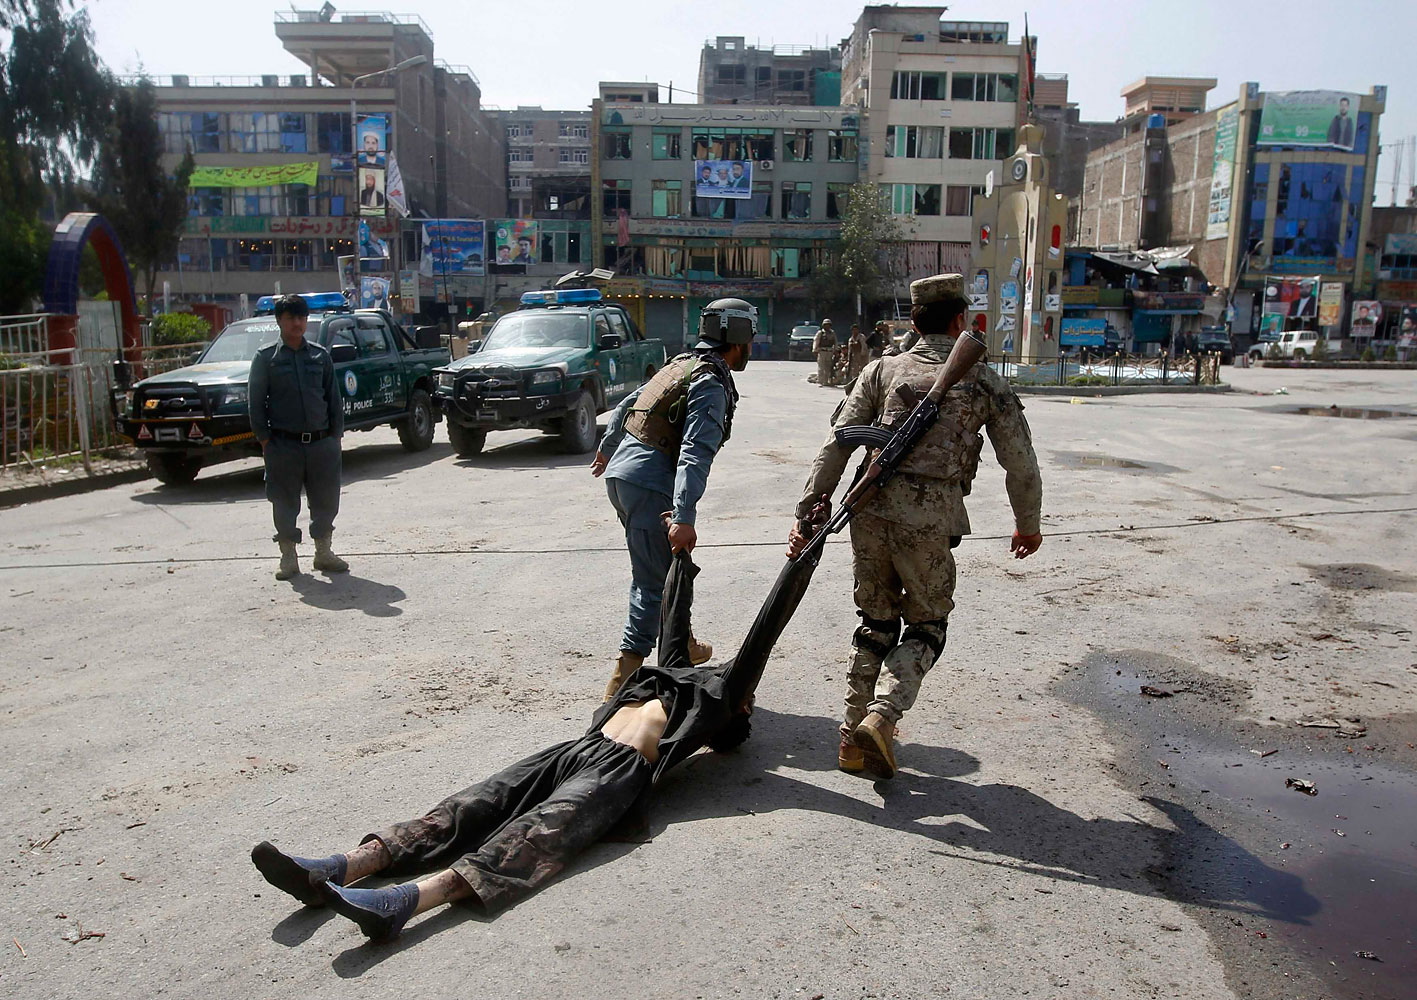 Afghan policemen remove the dead body of a Taliban insurgent from the site of a suicide car bomb attack in Jalalabad province, March 20, 2014. (Parwiz—Reuters)